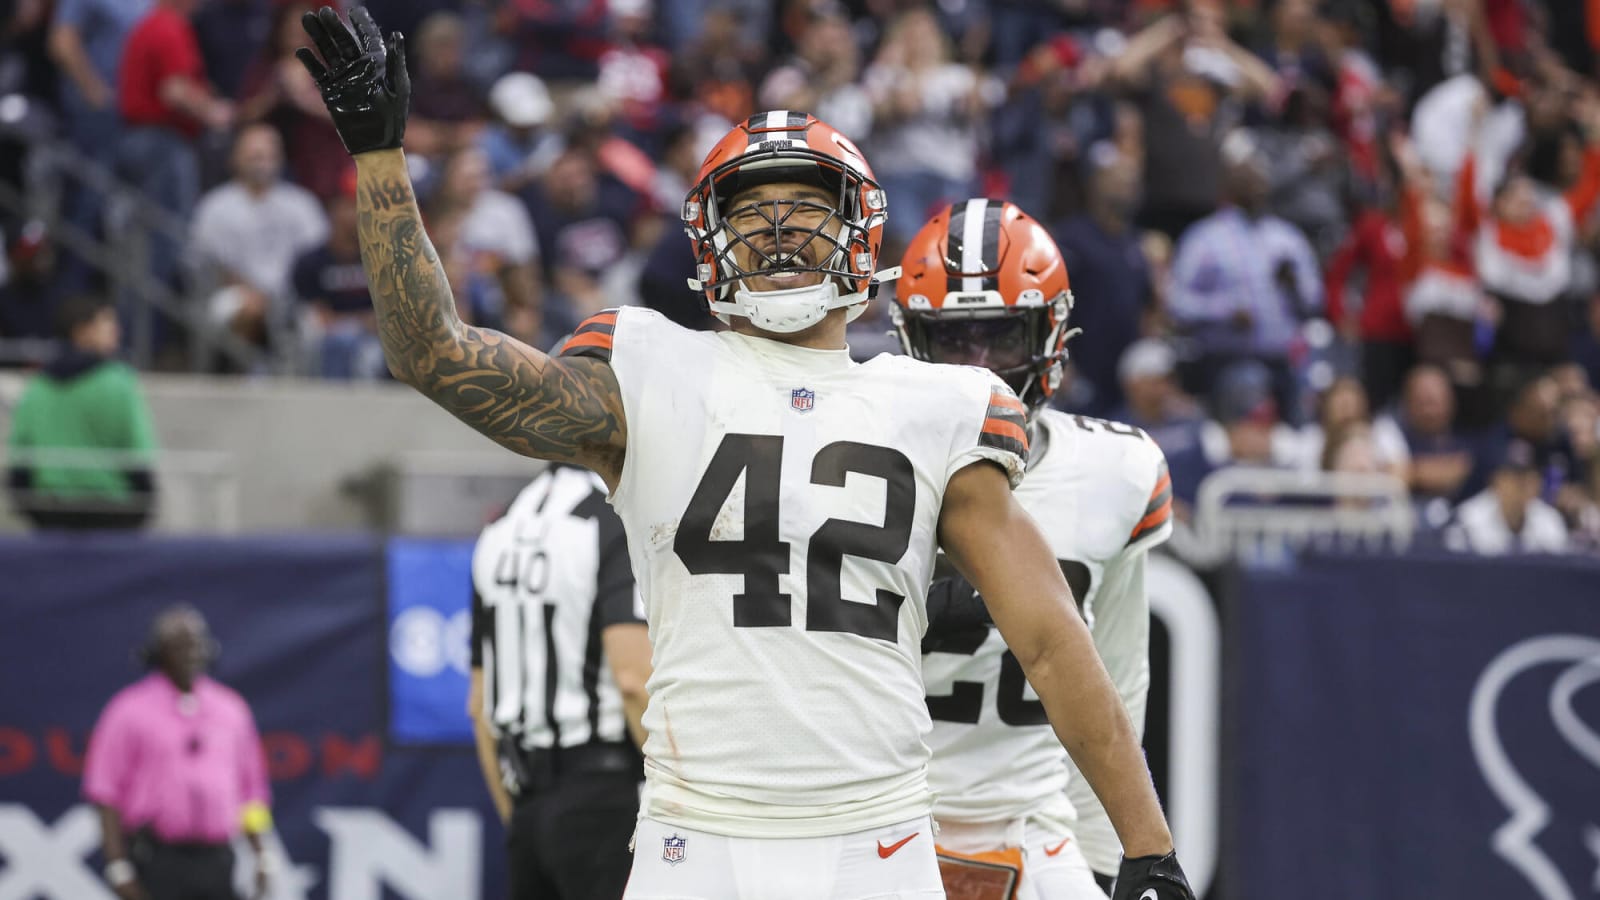 Browns pulled off wild statistical anomaly in win over Texans